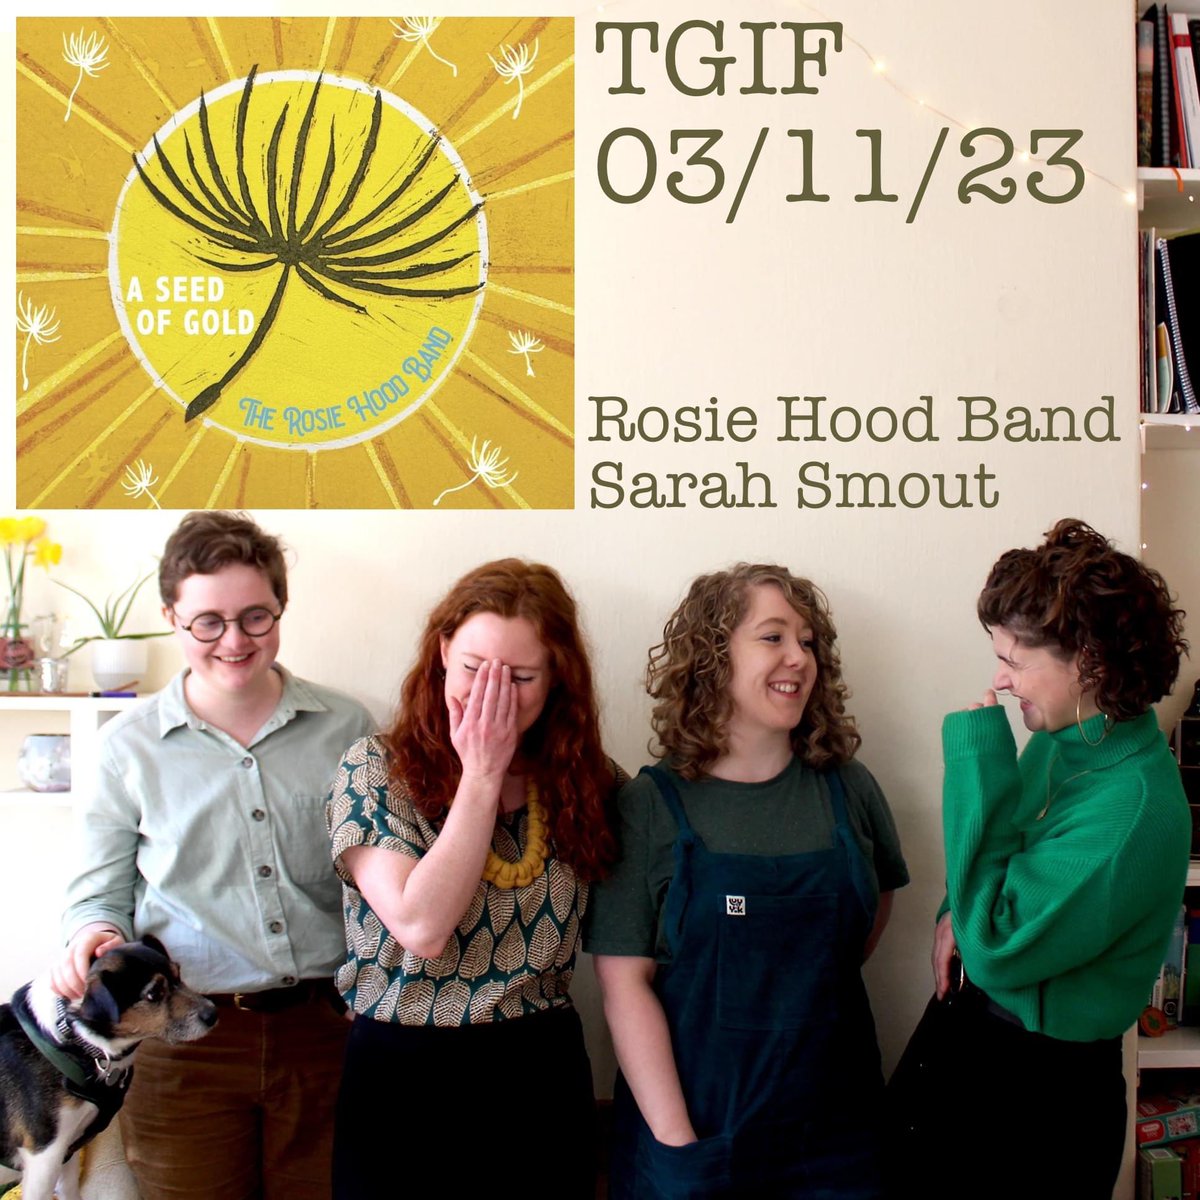 TGIF Fri 3/11/23 10am sheffieldlive.org/player - on the launch day of A Seed of Gold, we chat to @RosieHood Band about the tour and album. Also to @SarahSmout2 about her beautiful new single At Sea. And brand new tracks from @HollyClarkemus @Helen_Lindley and more. Join us!